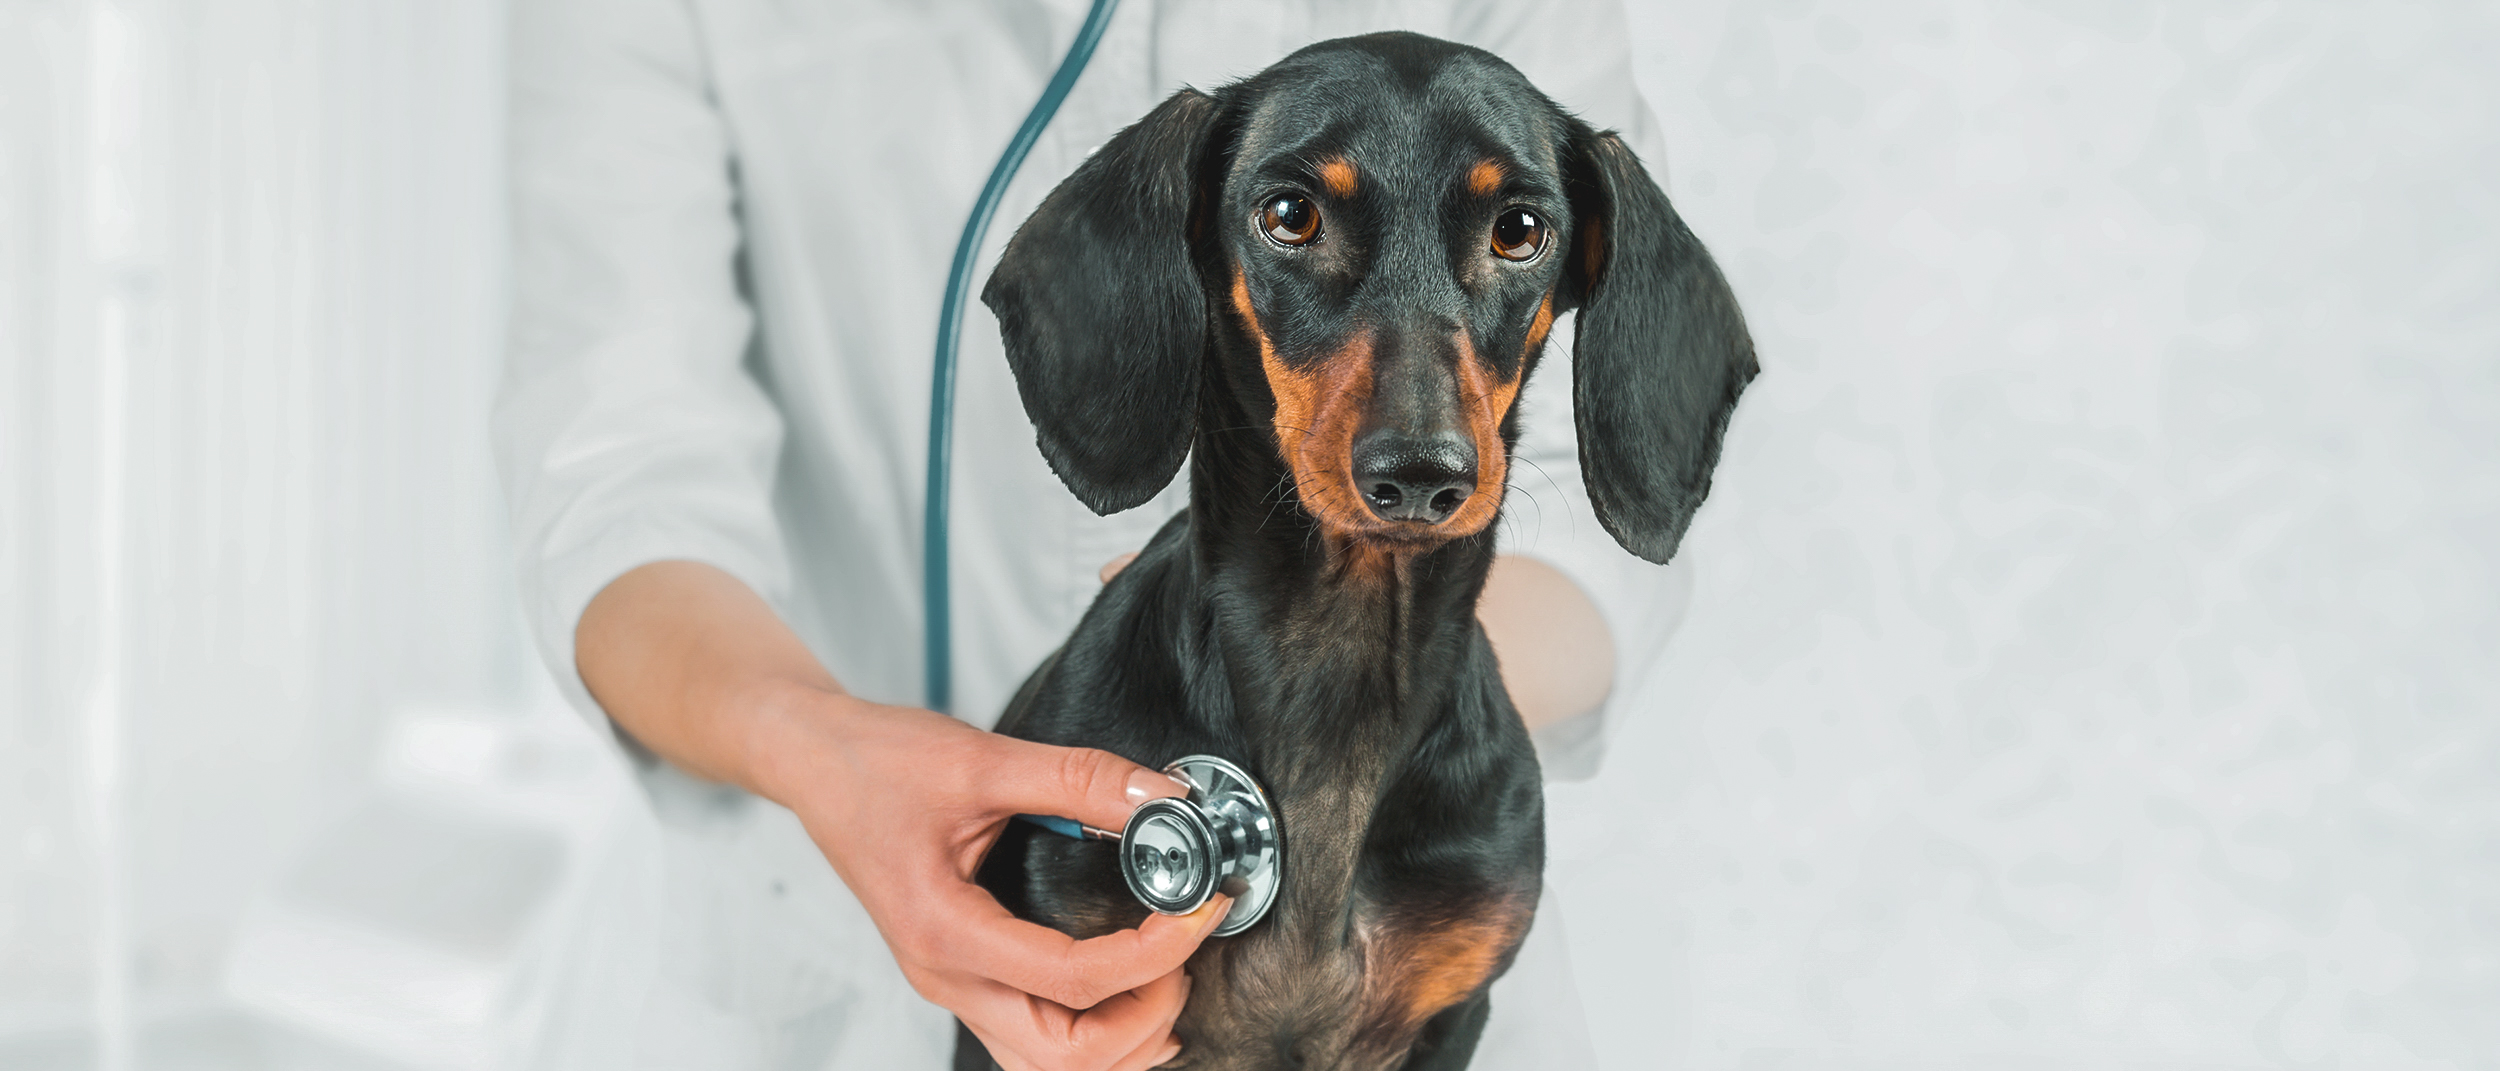 Adult Dachshund sitting on an examination table being checked over by a vet.